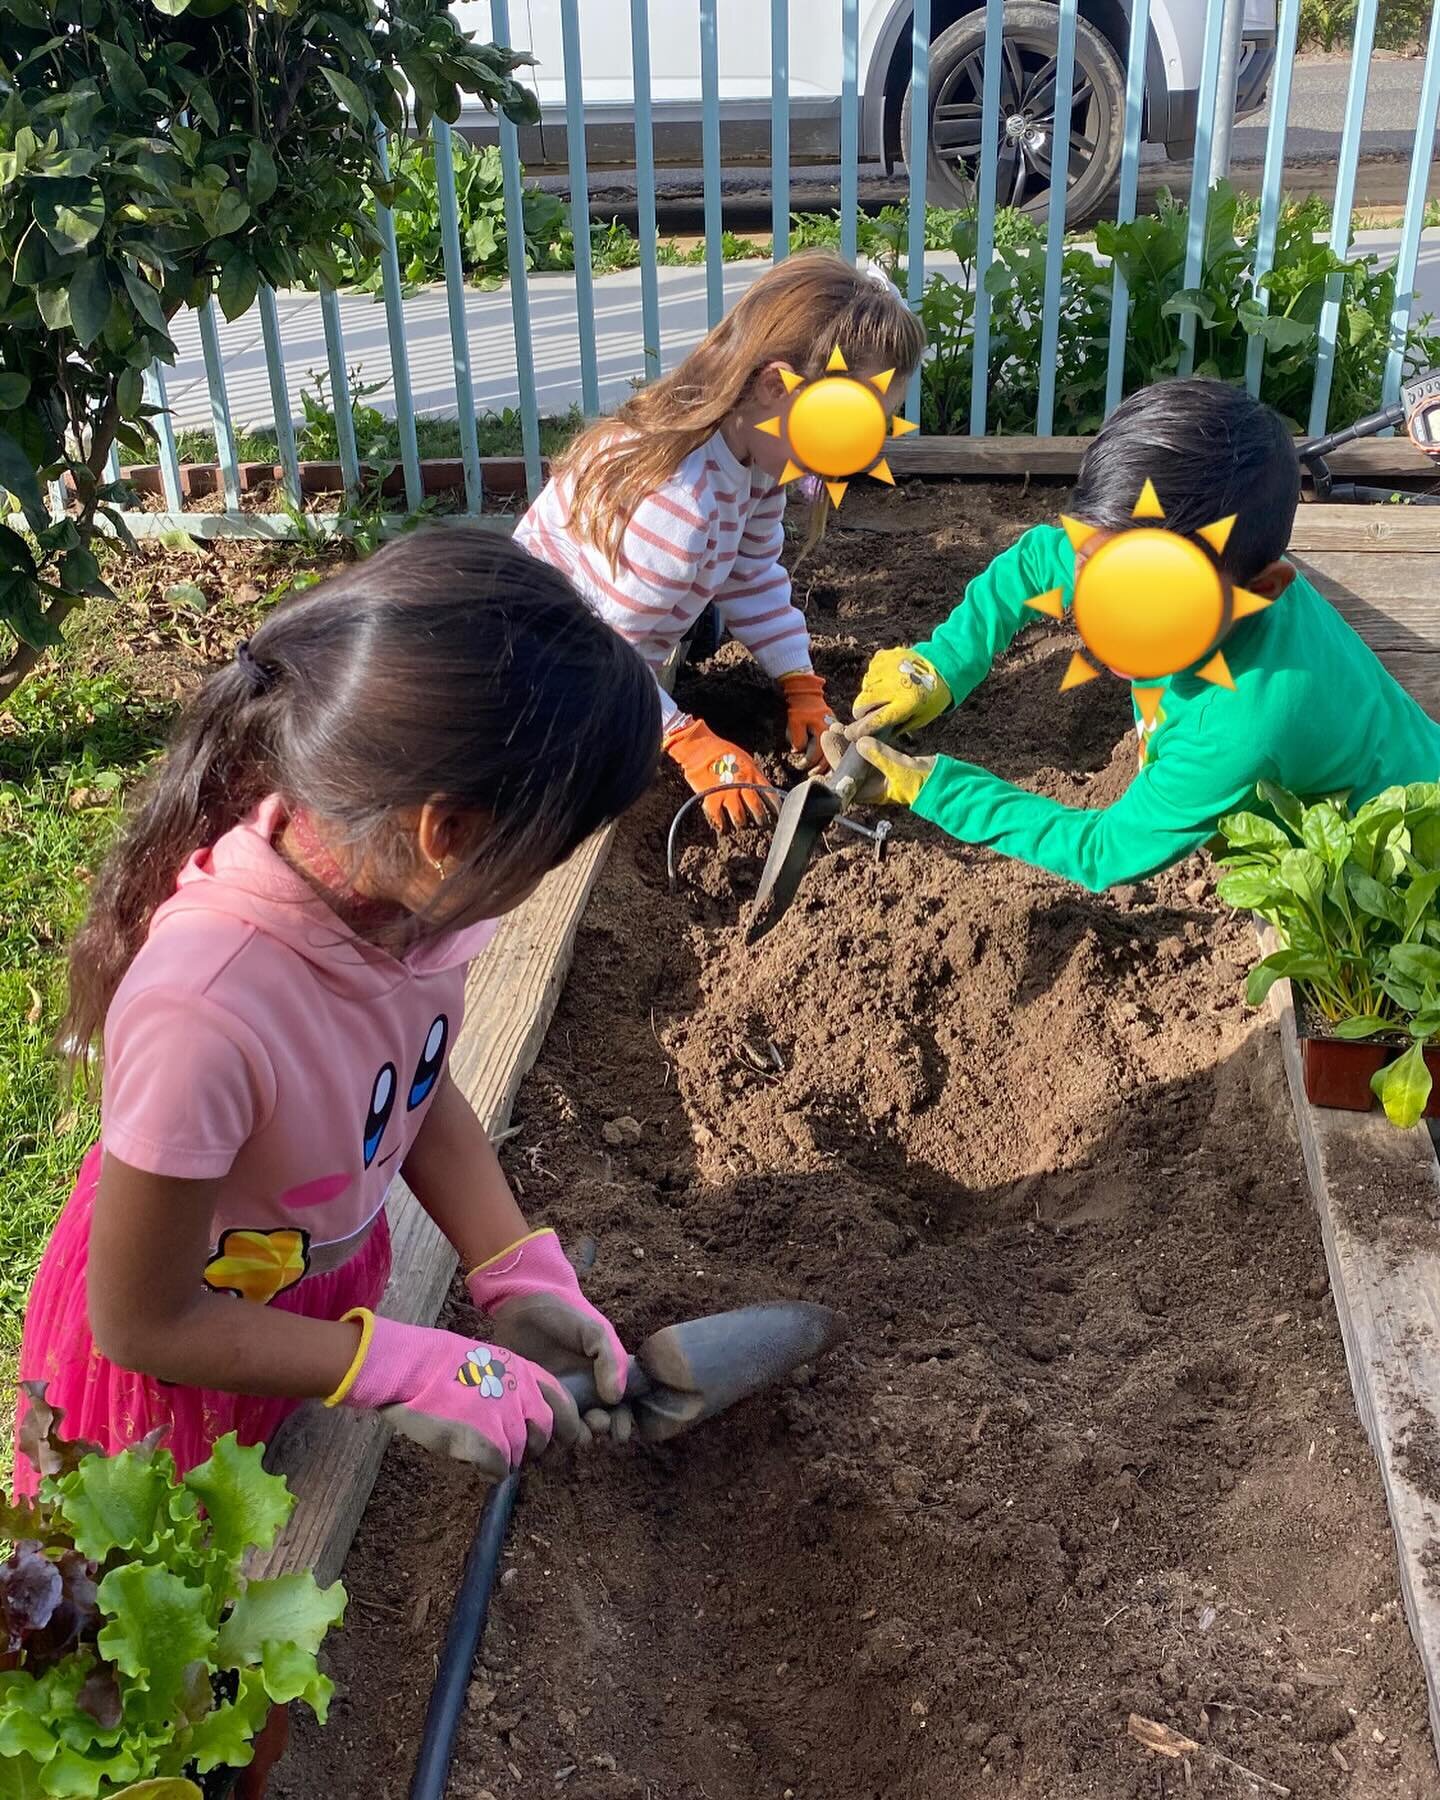 We weeded, we amended, we dug holes and planted! I love how hard these kindergarteners work. And the critters they find never cease to amaze me 🐛